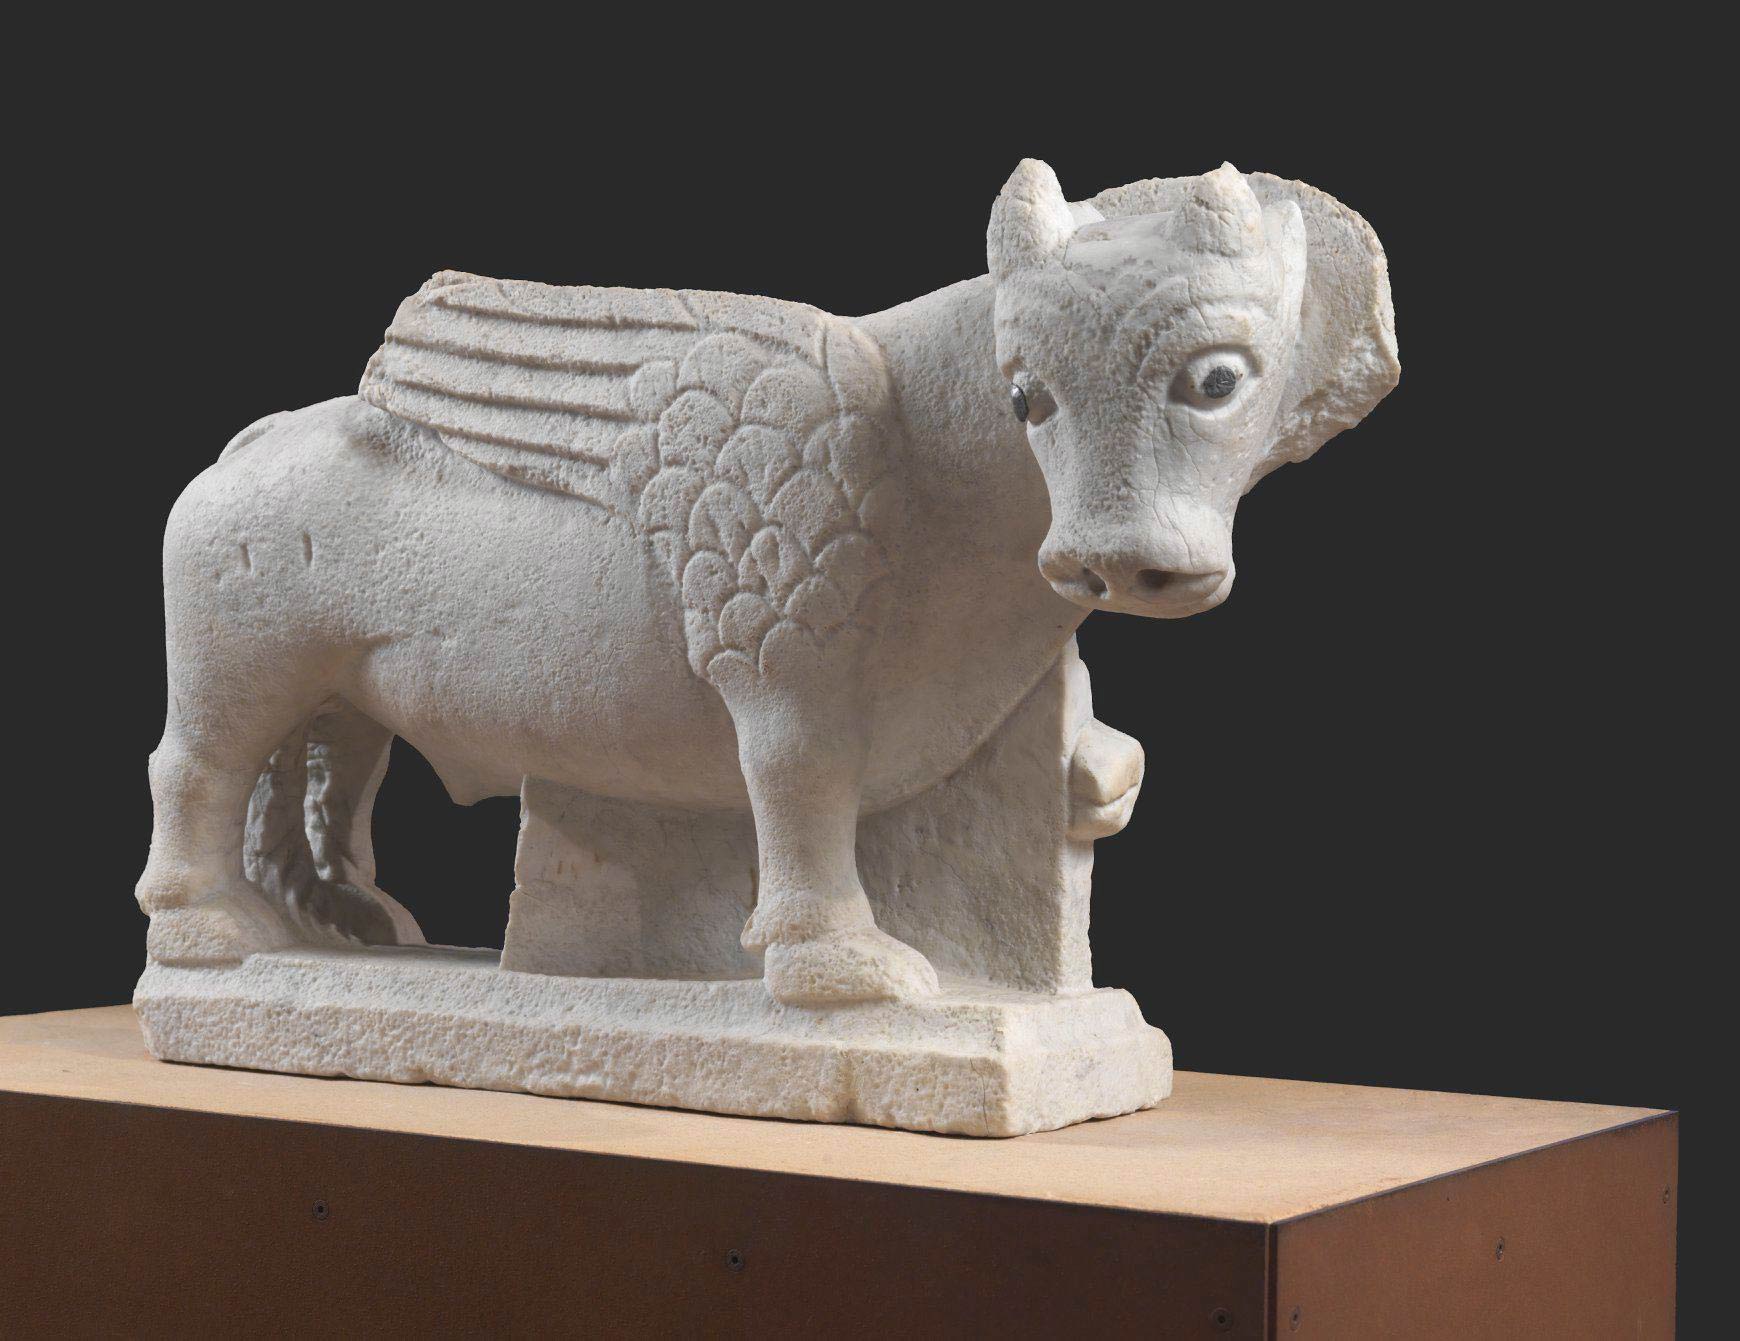 Unknown artist, Winged Ox (13th century; marble; Spoleto, National Museum of the Duchy of Spoleto)